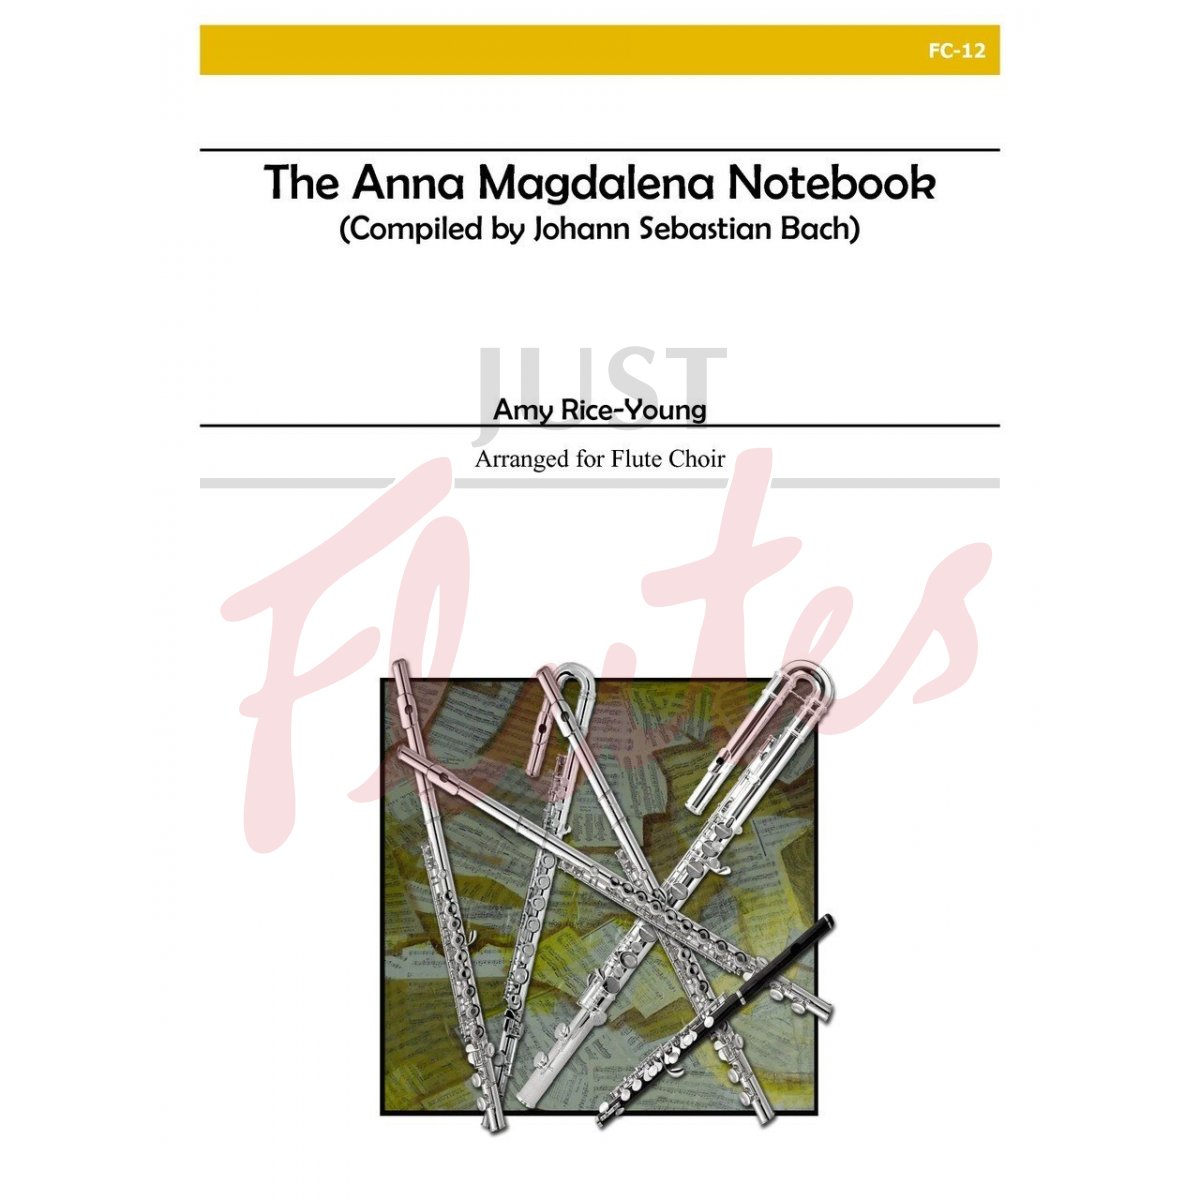 The Anna Magdalena Notebook (and other selections)